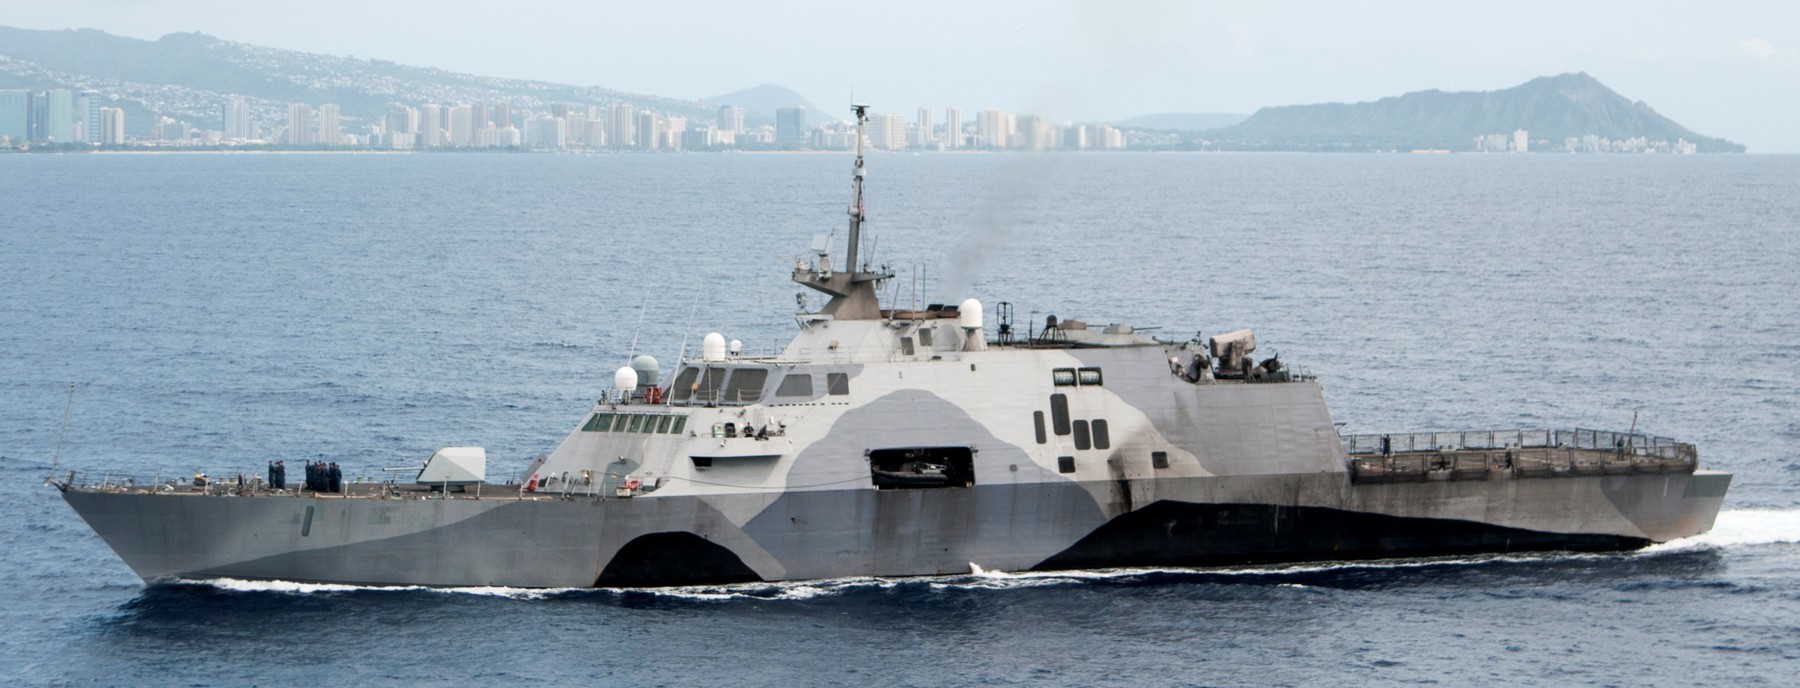 lcs-1 uss freedom class littoral combat ship us navy 14